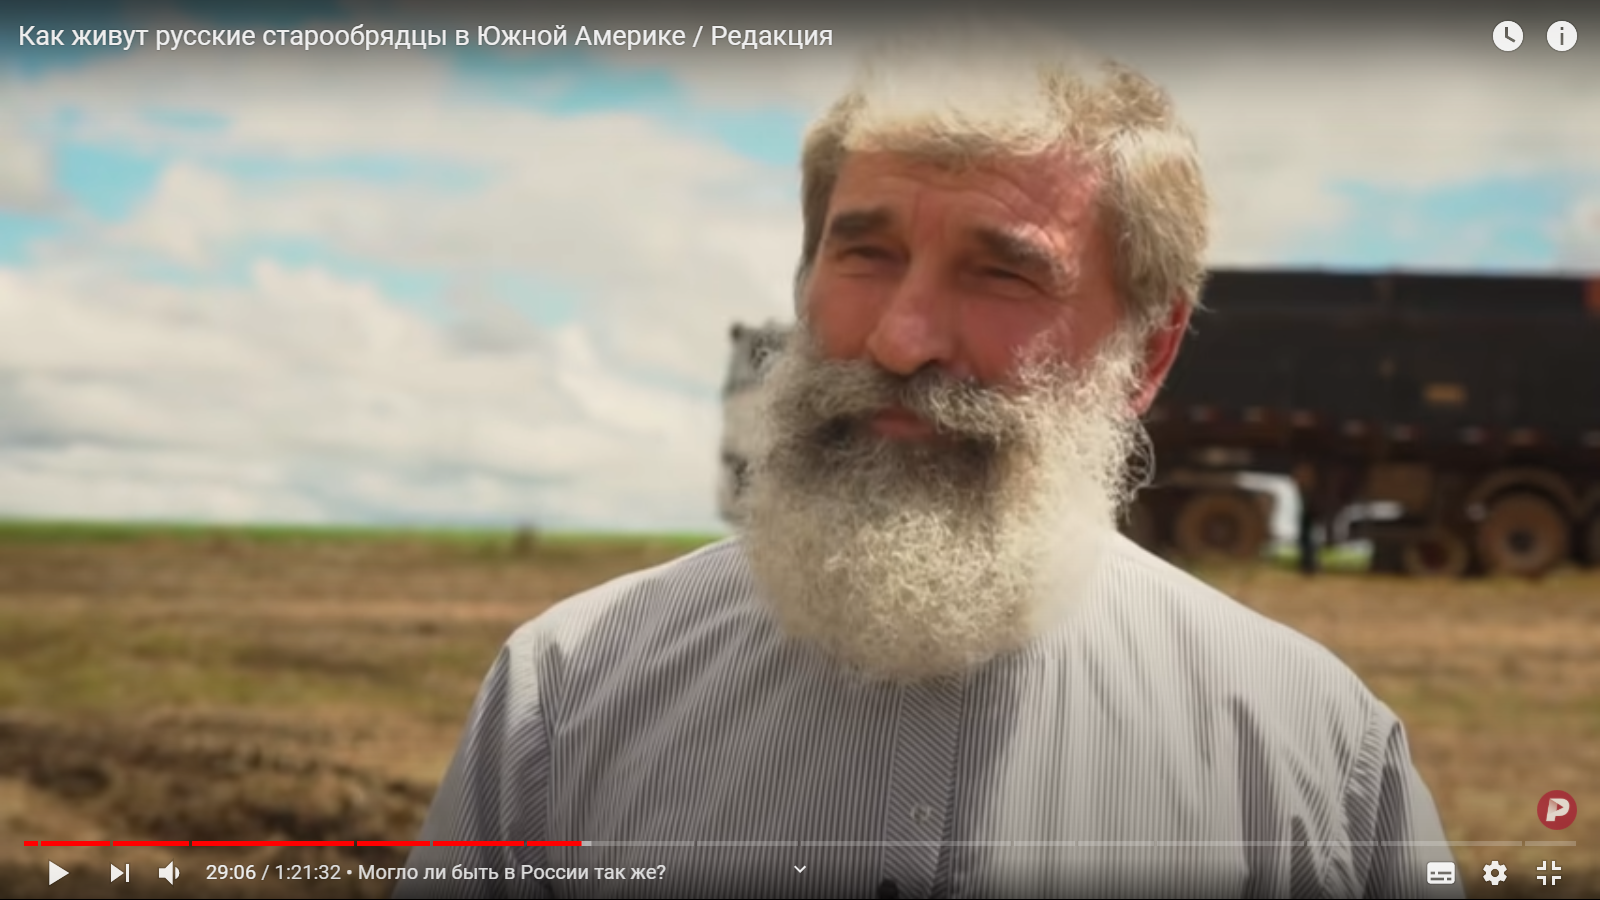 According to the laws of the sect: why Alexey Pivovarov romanticizes Russian Old Believers